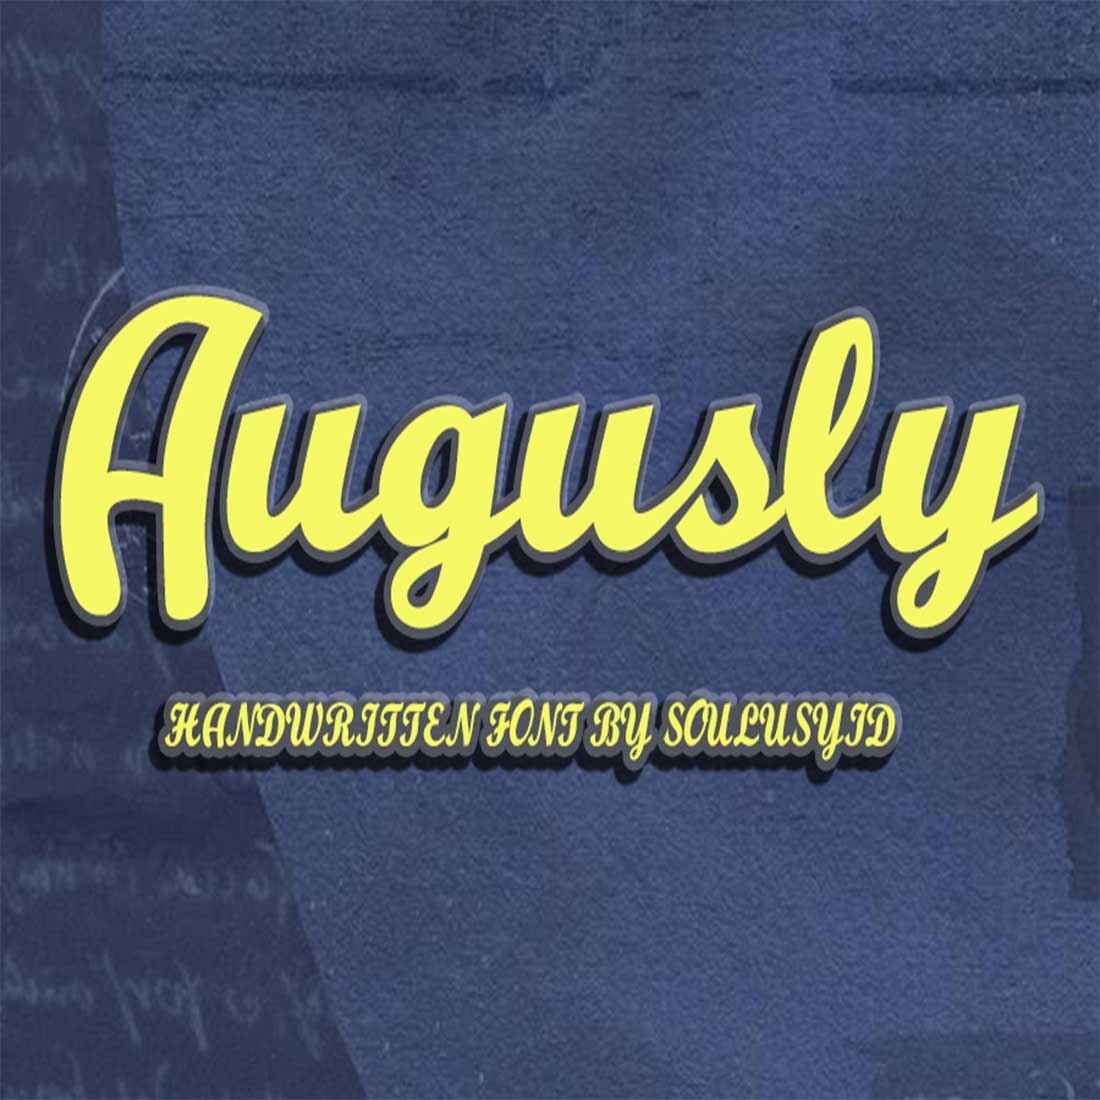 Augusly cover image.